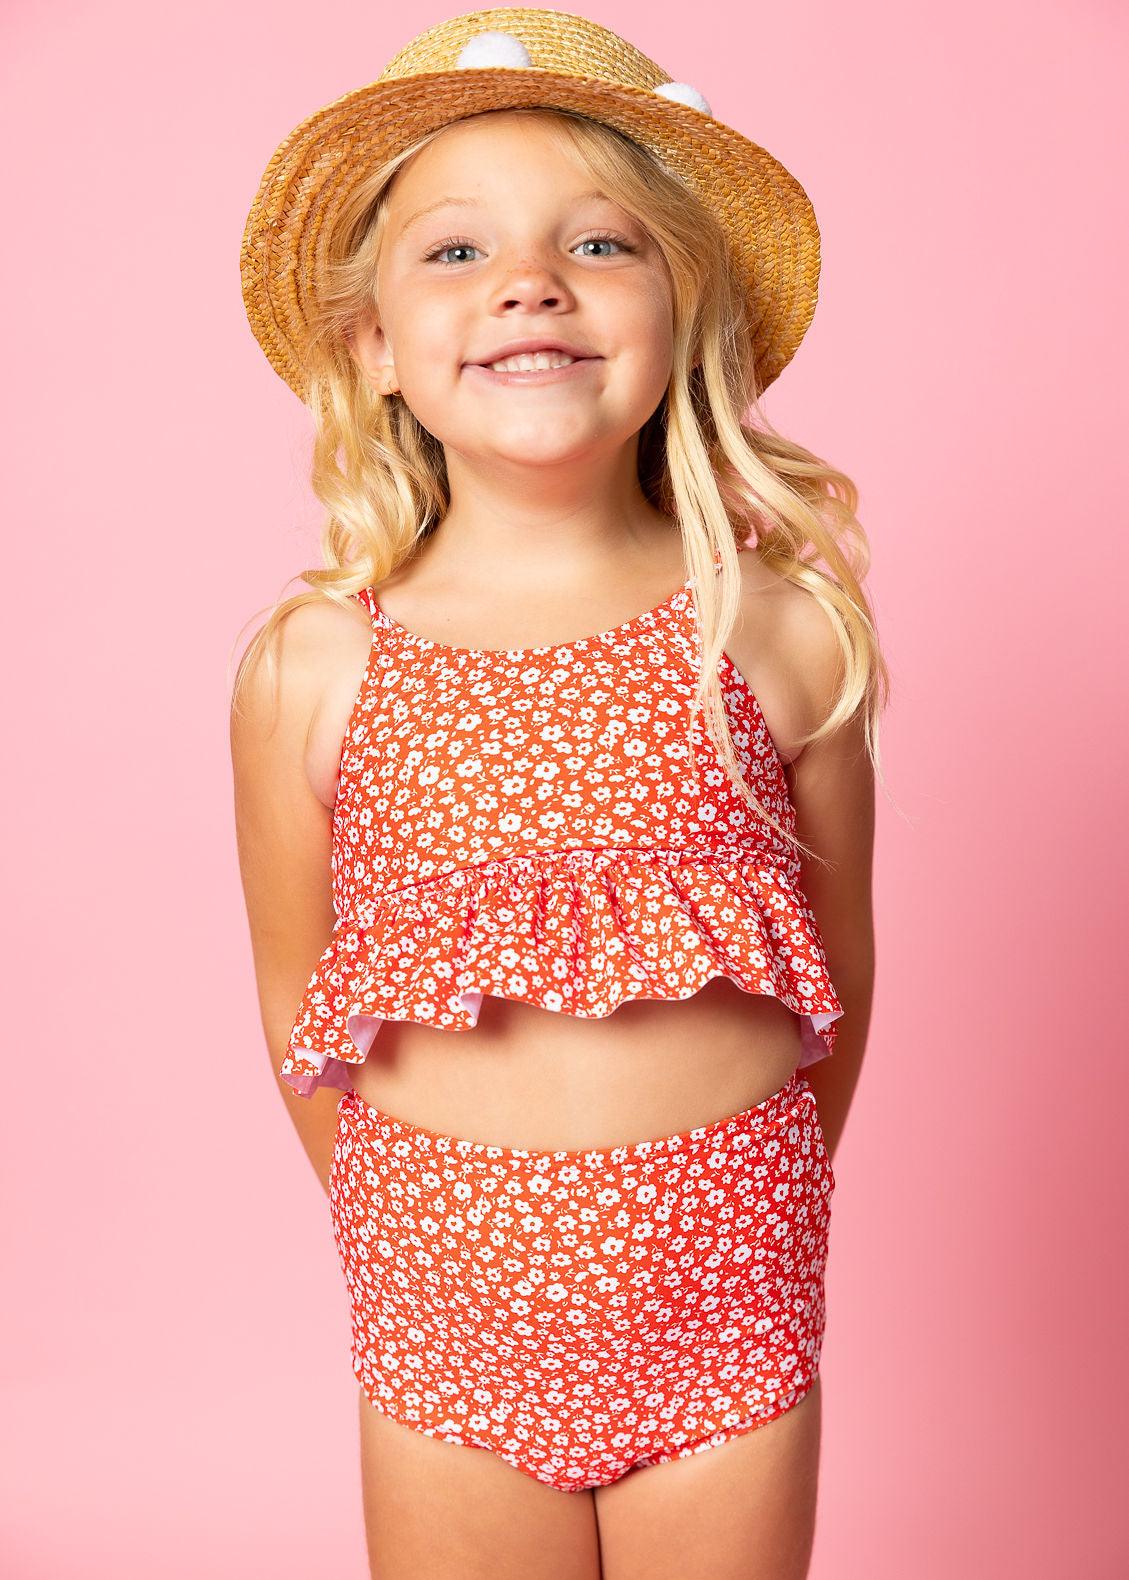 Girls Crop Top Swimsuit - Red Ditsy Floral